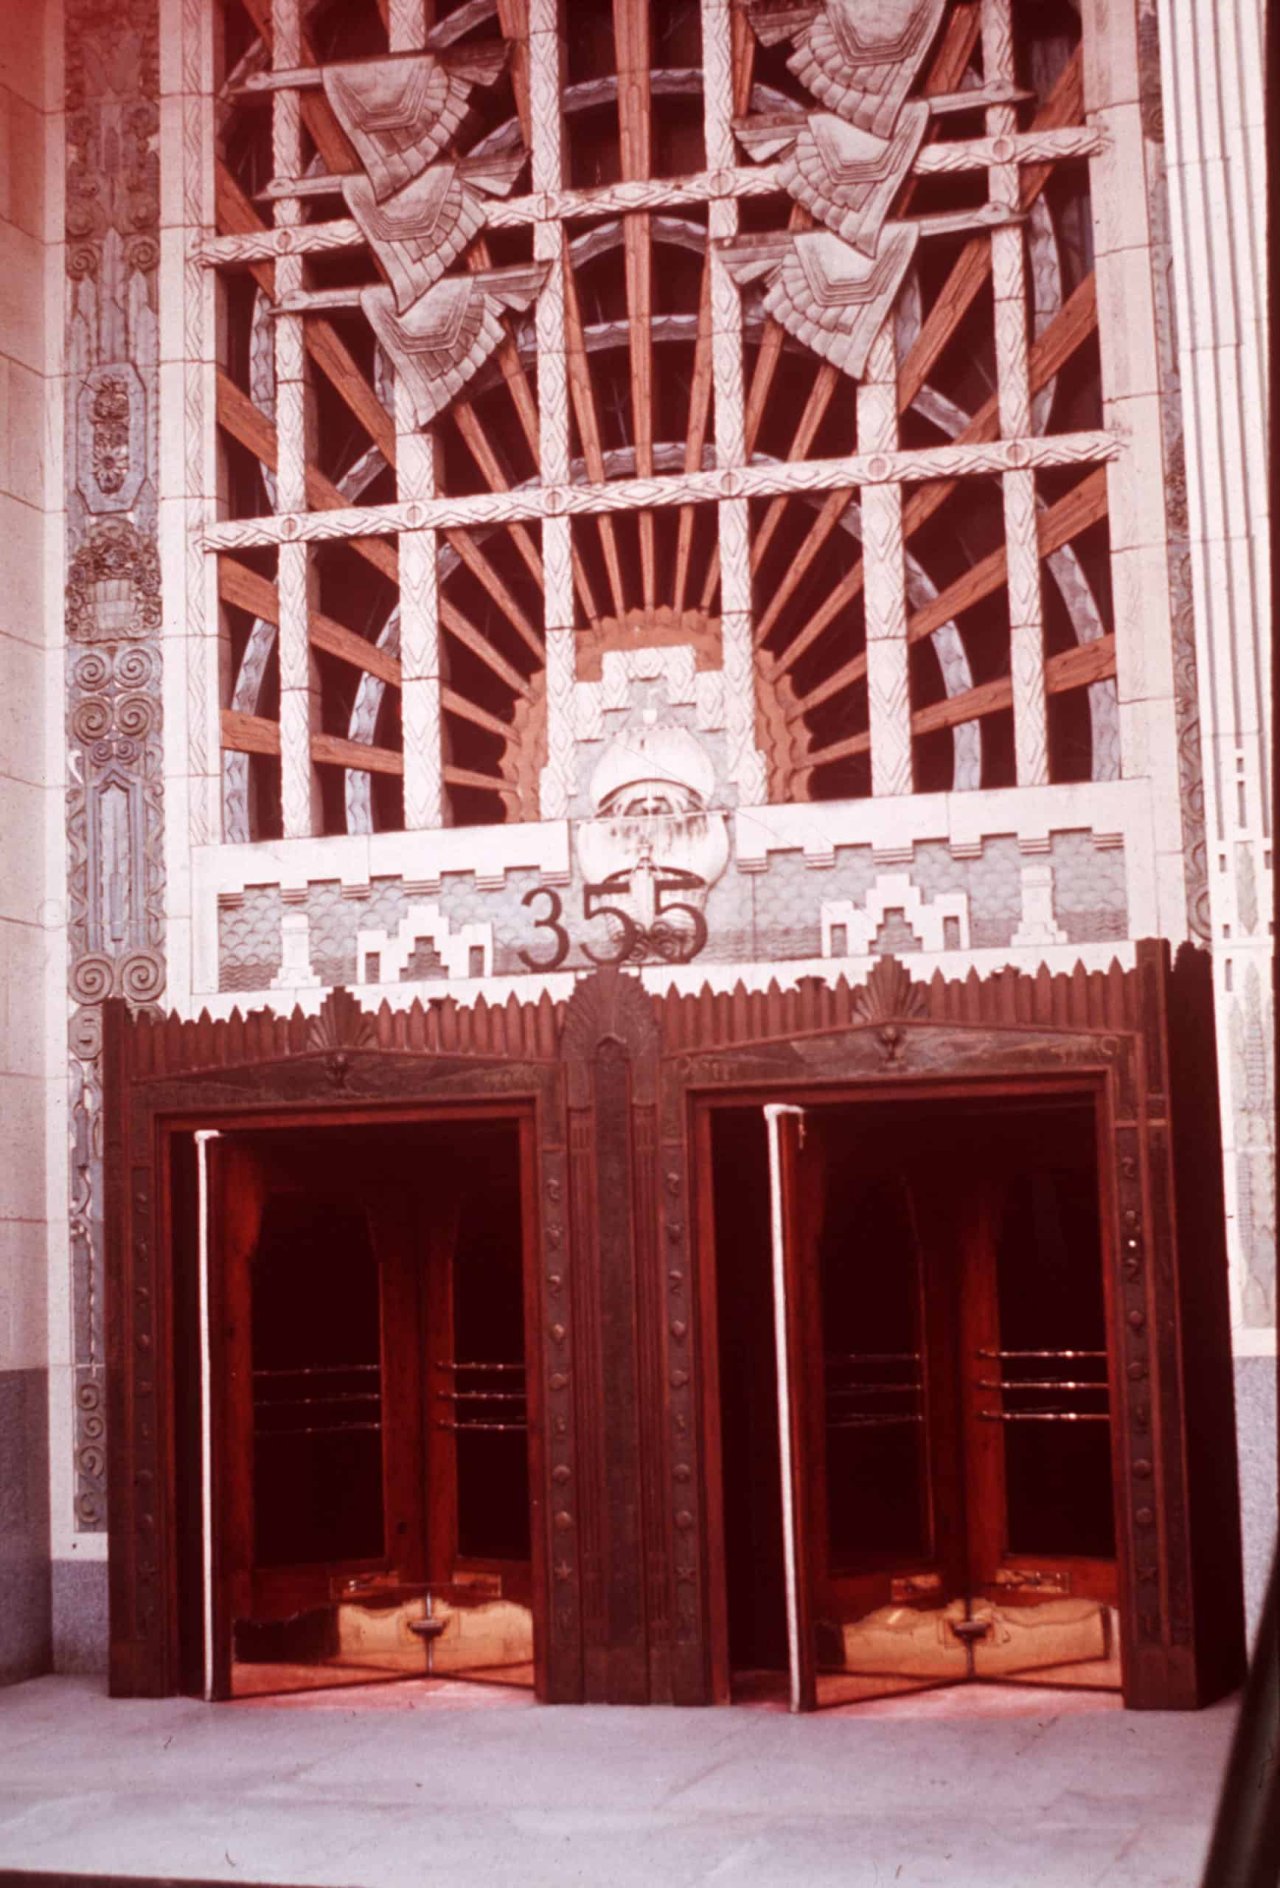 Entrance detail of the Marine Building, exact date unknown. City of Vancouver Archives, CVA 780-31